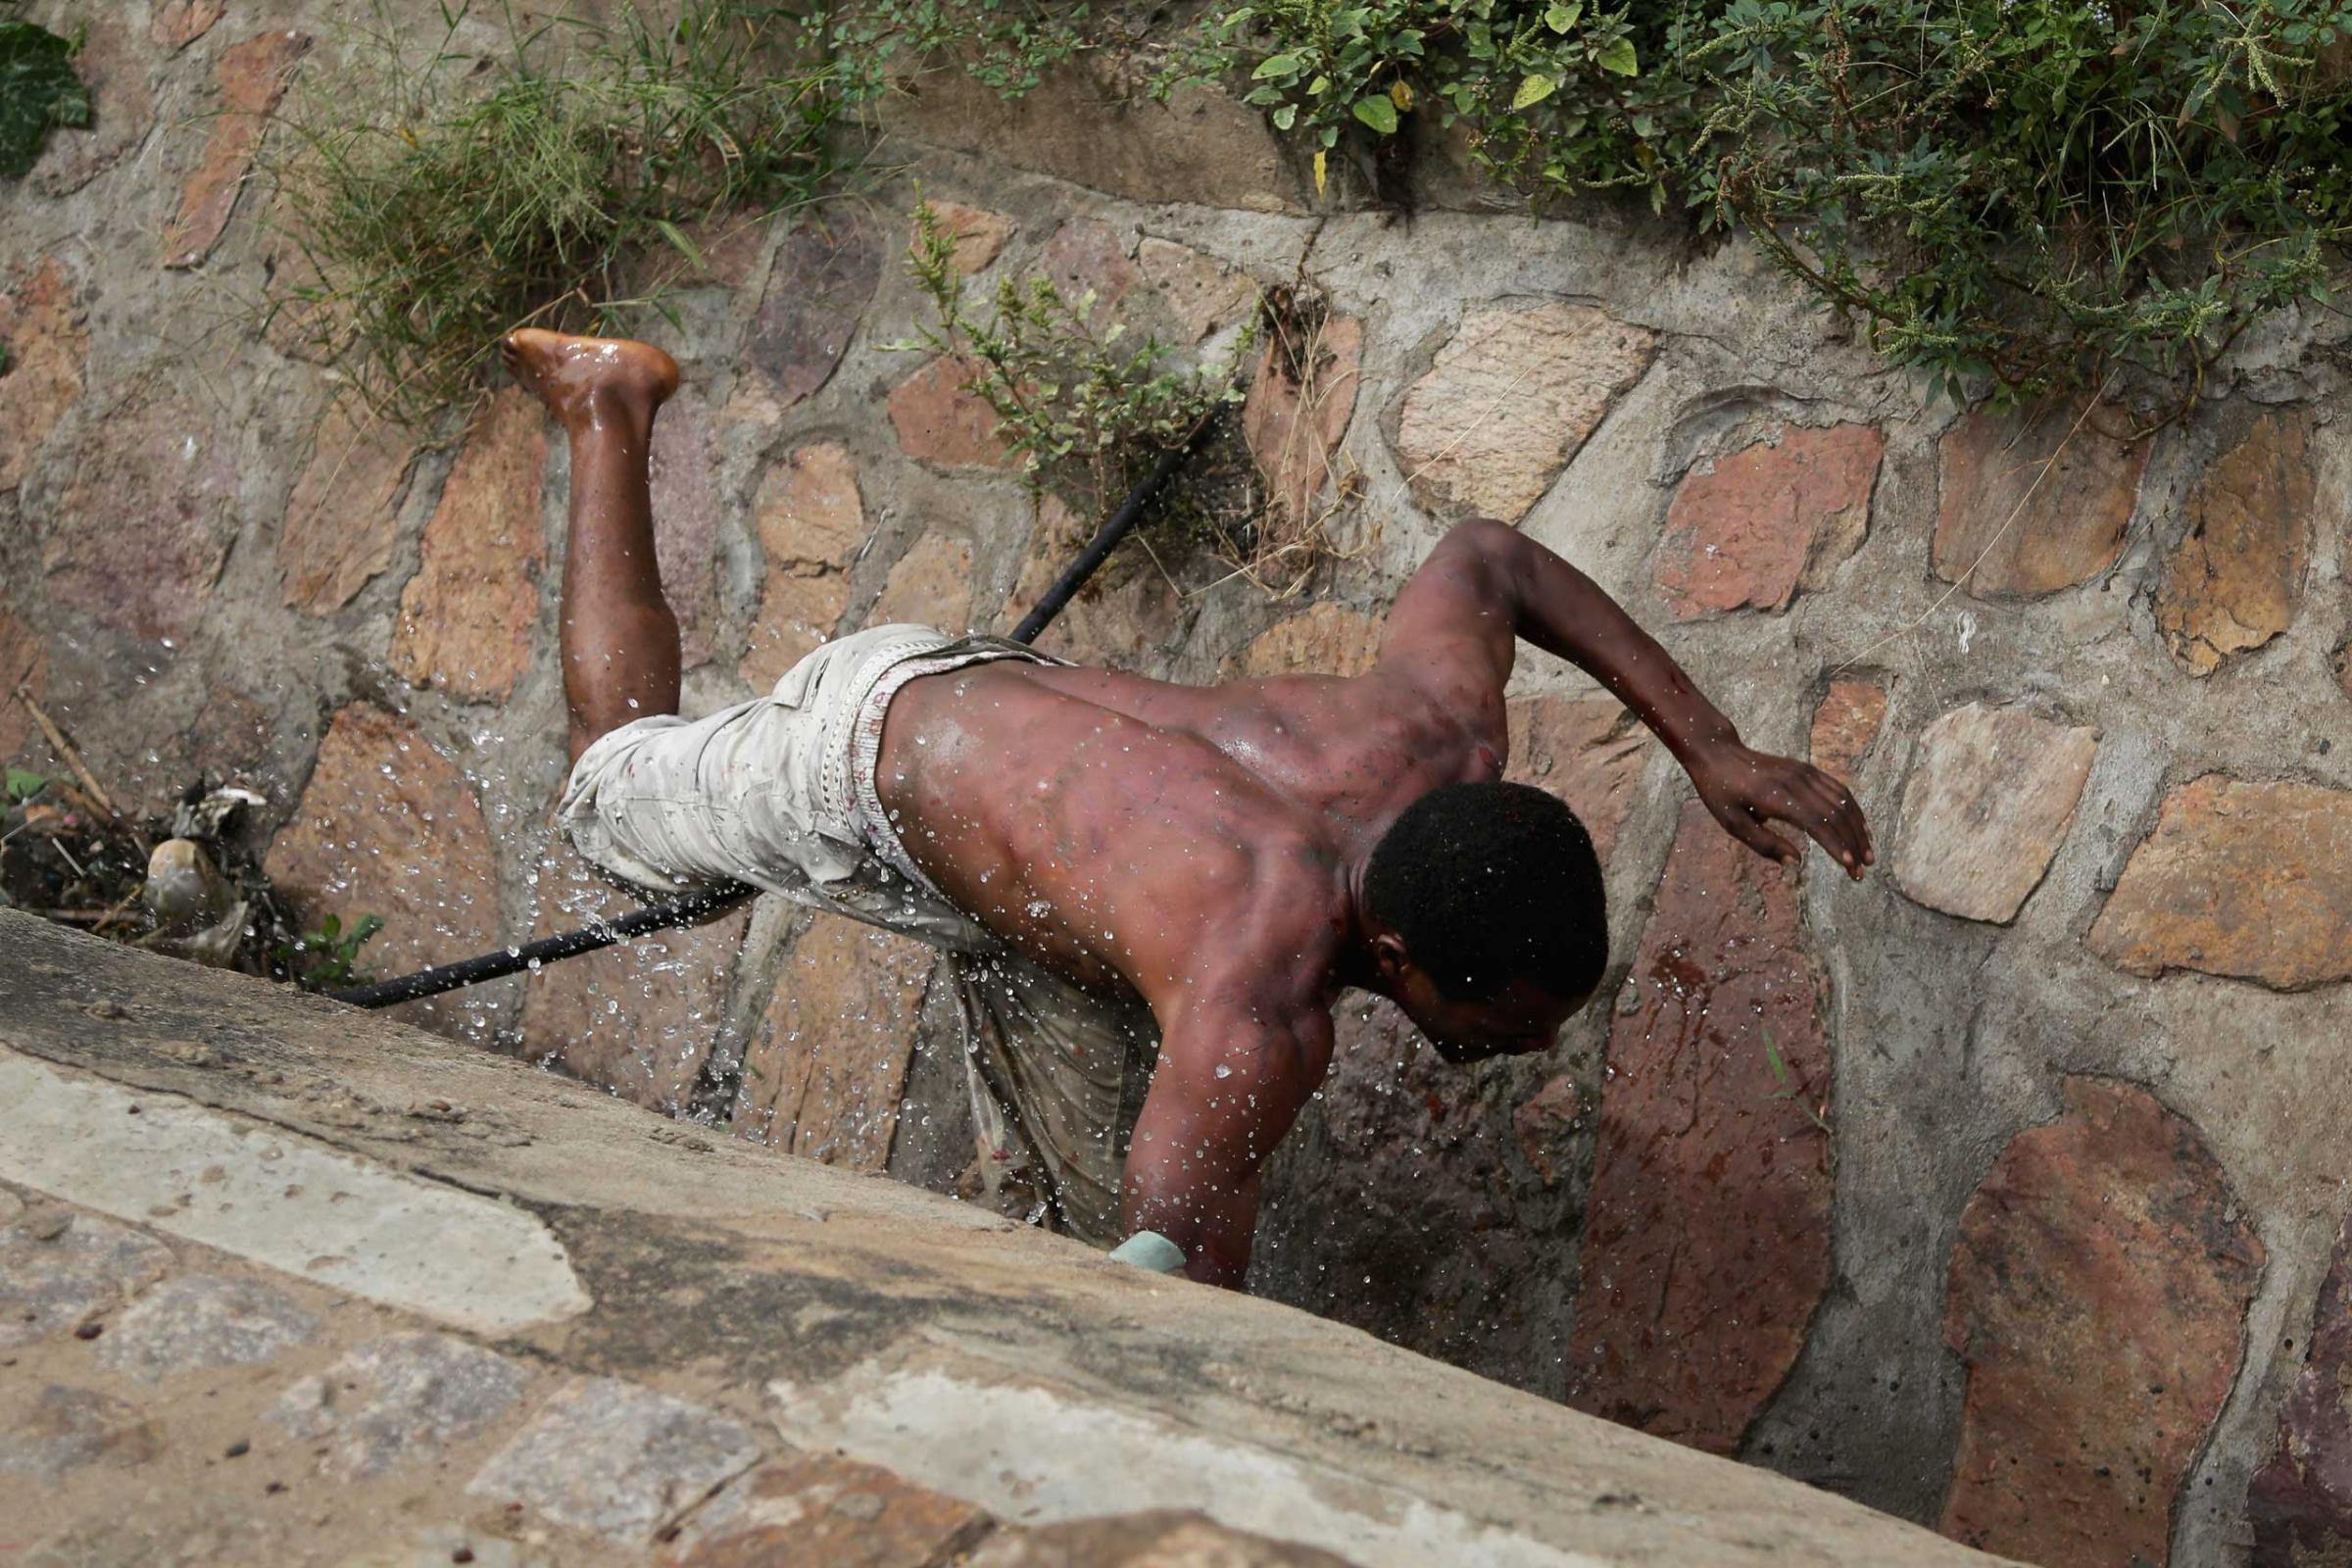 Niyonzima falls in the sewer as he flees from his house under a hail of stones thrown by a mob.